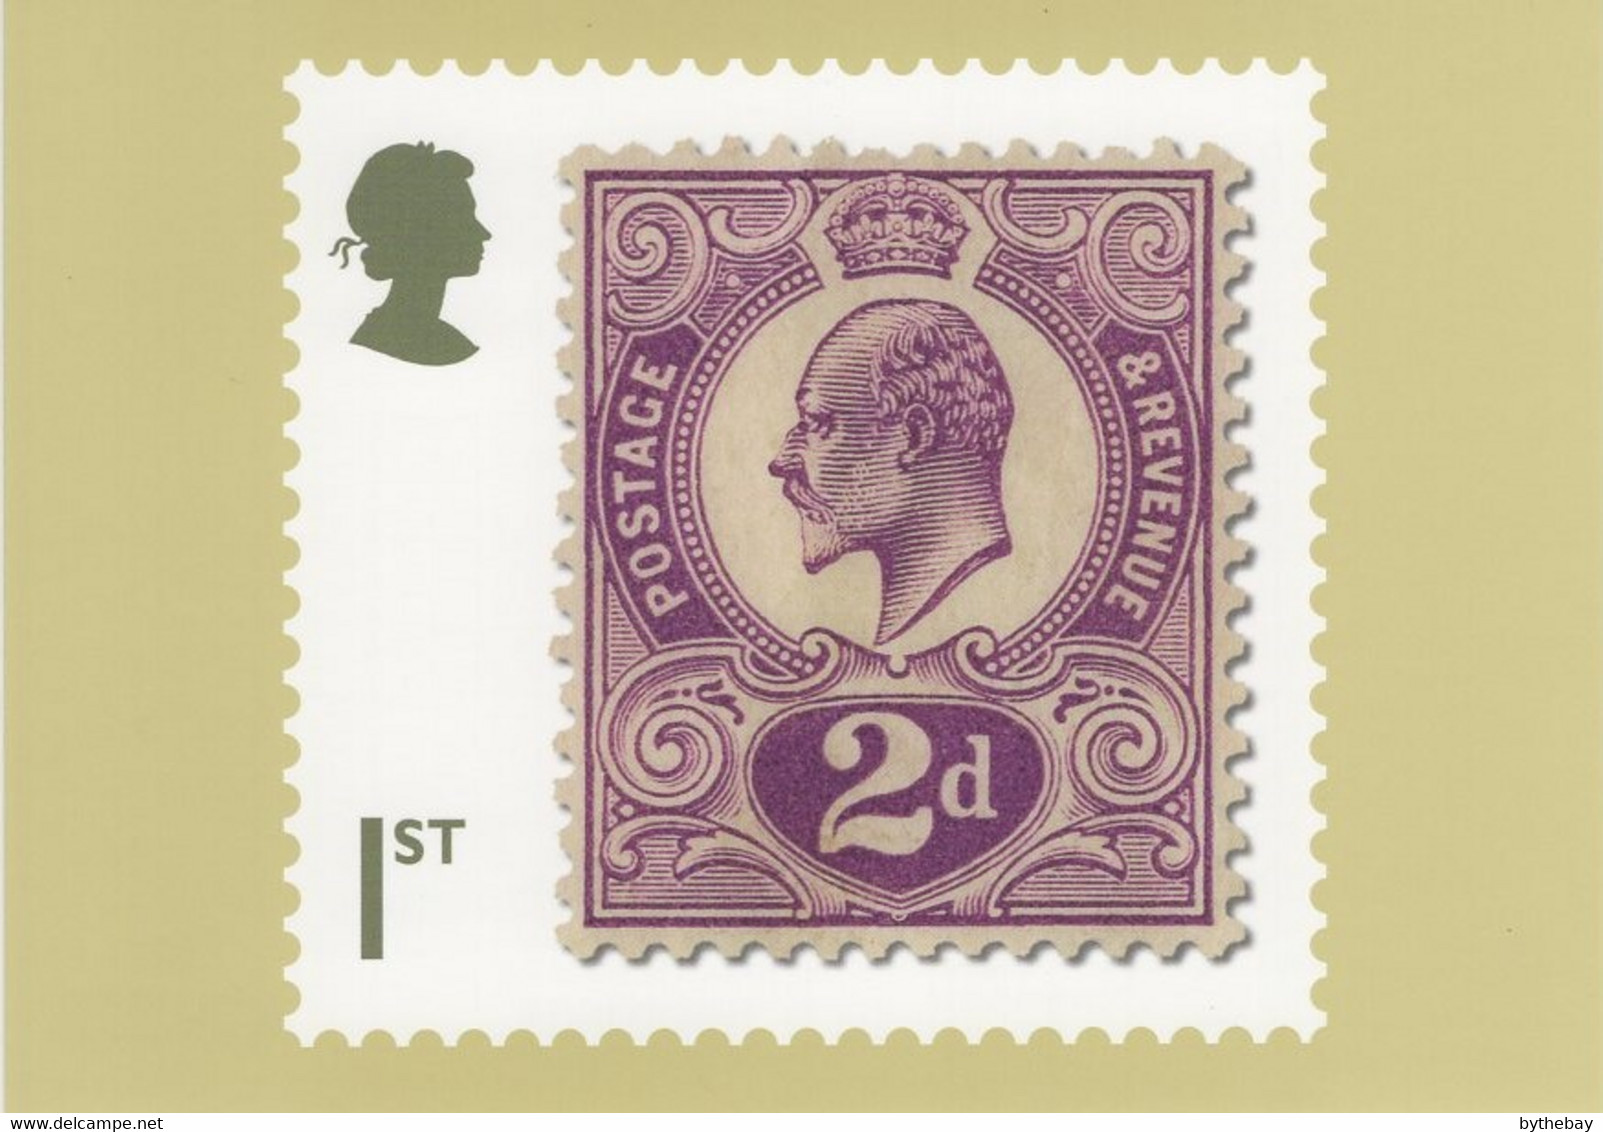 Great Britain 2019 PHQ Card Sc 3802b 1st 1p Edward VII Unissued Classic British Stamps - Carte PHQ